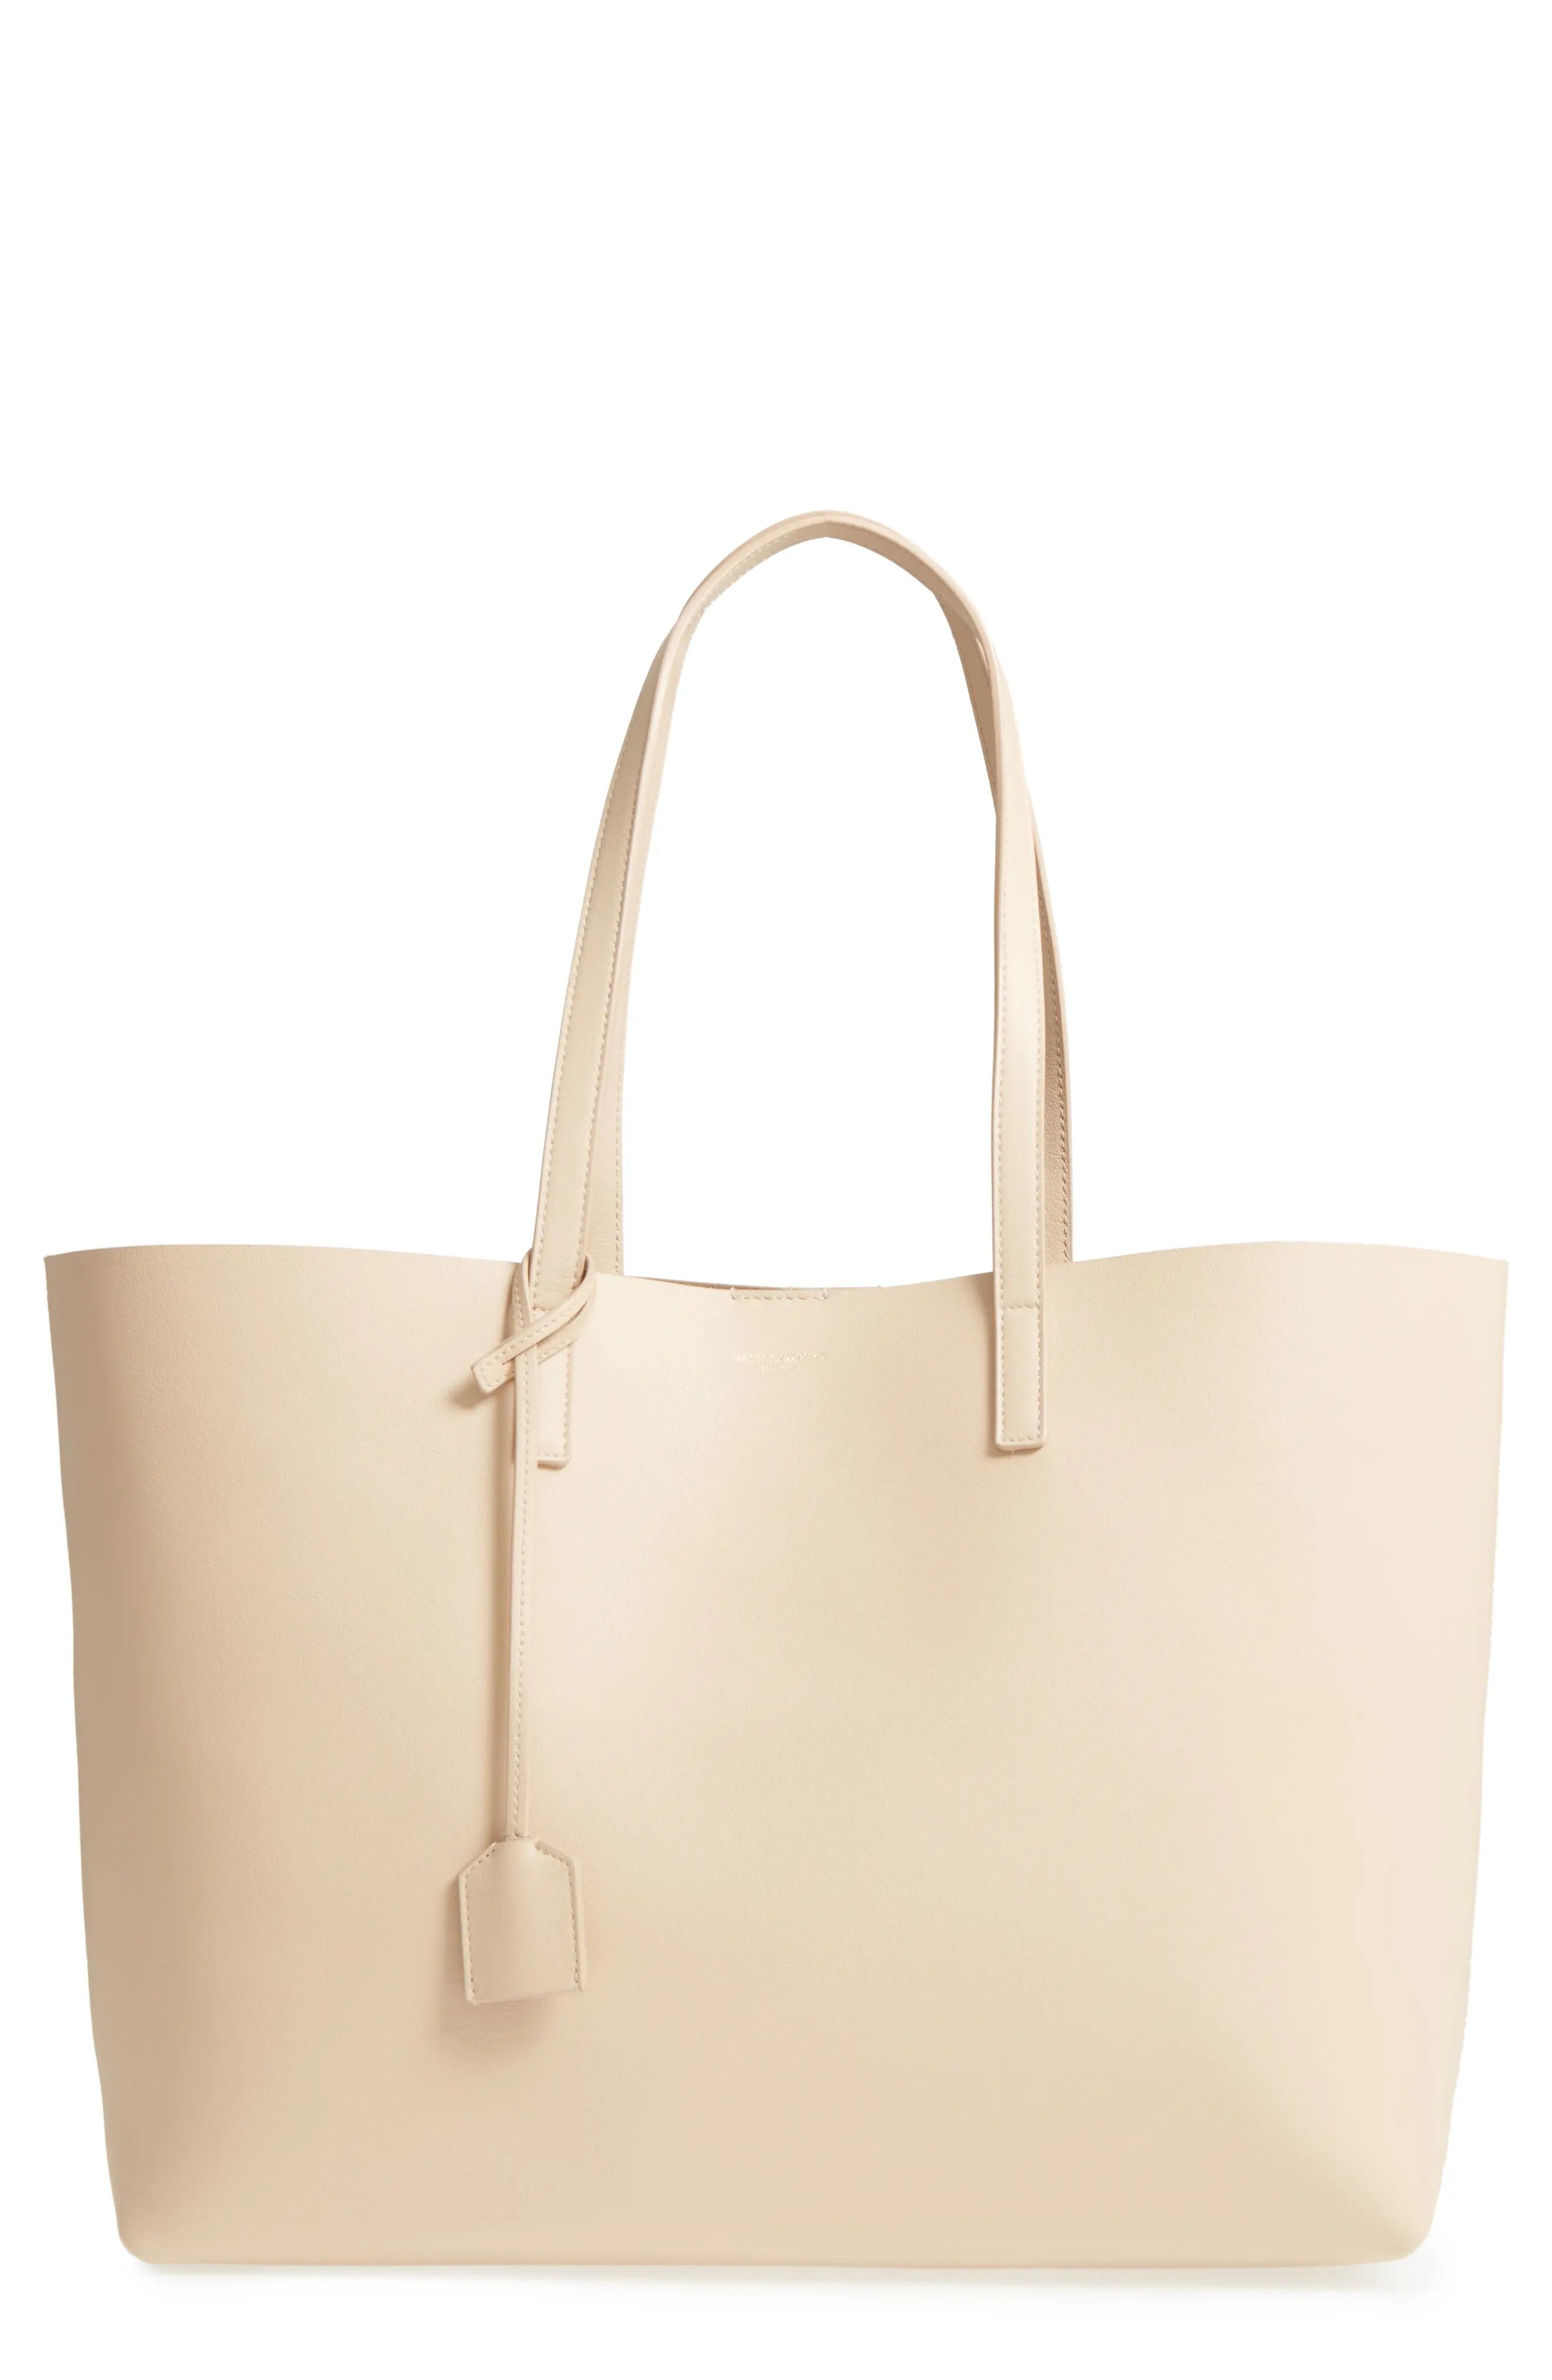 Saint Laurent 'Shopping' Leather Tote - Pink | Nordstrom